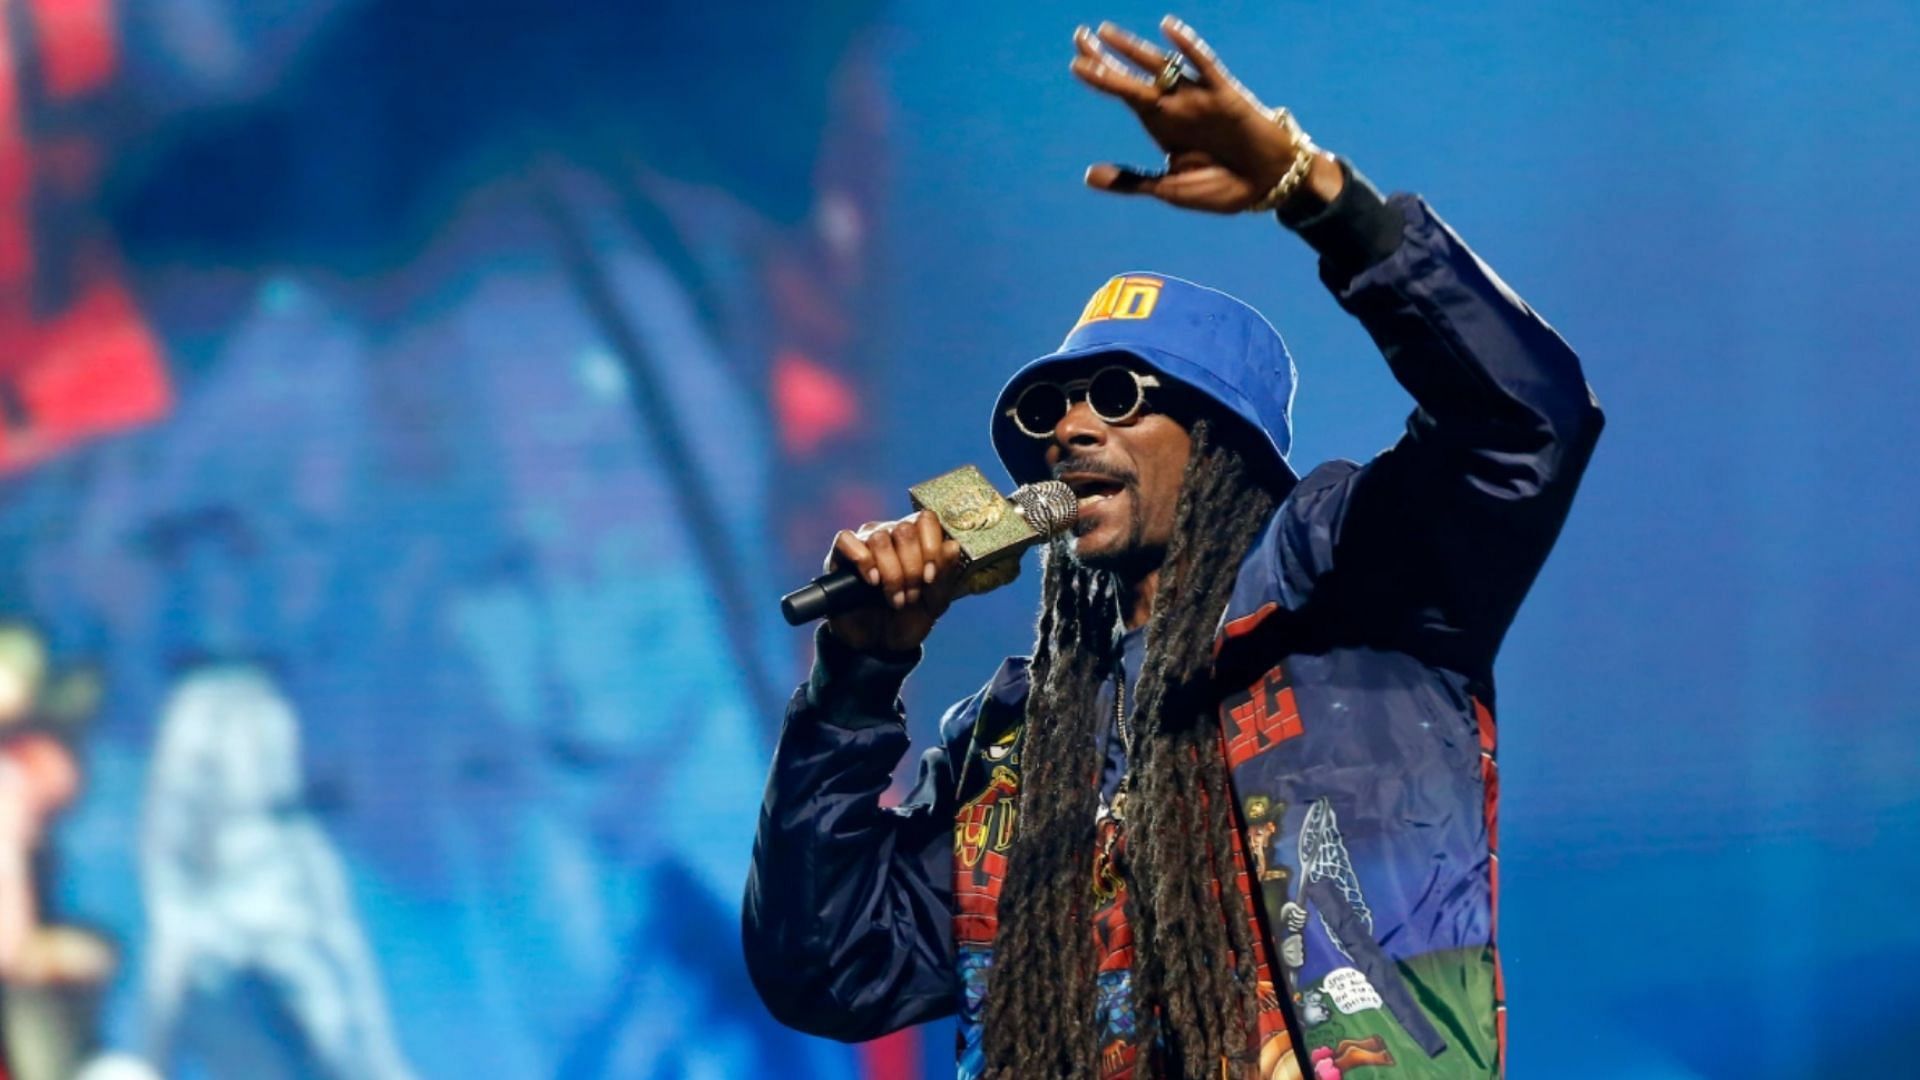 Snoop Dogg Spokane Arena Concert Tickets, where to buy, price, and more